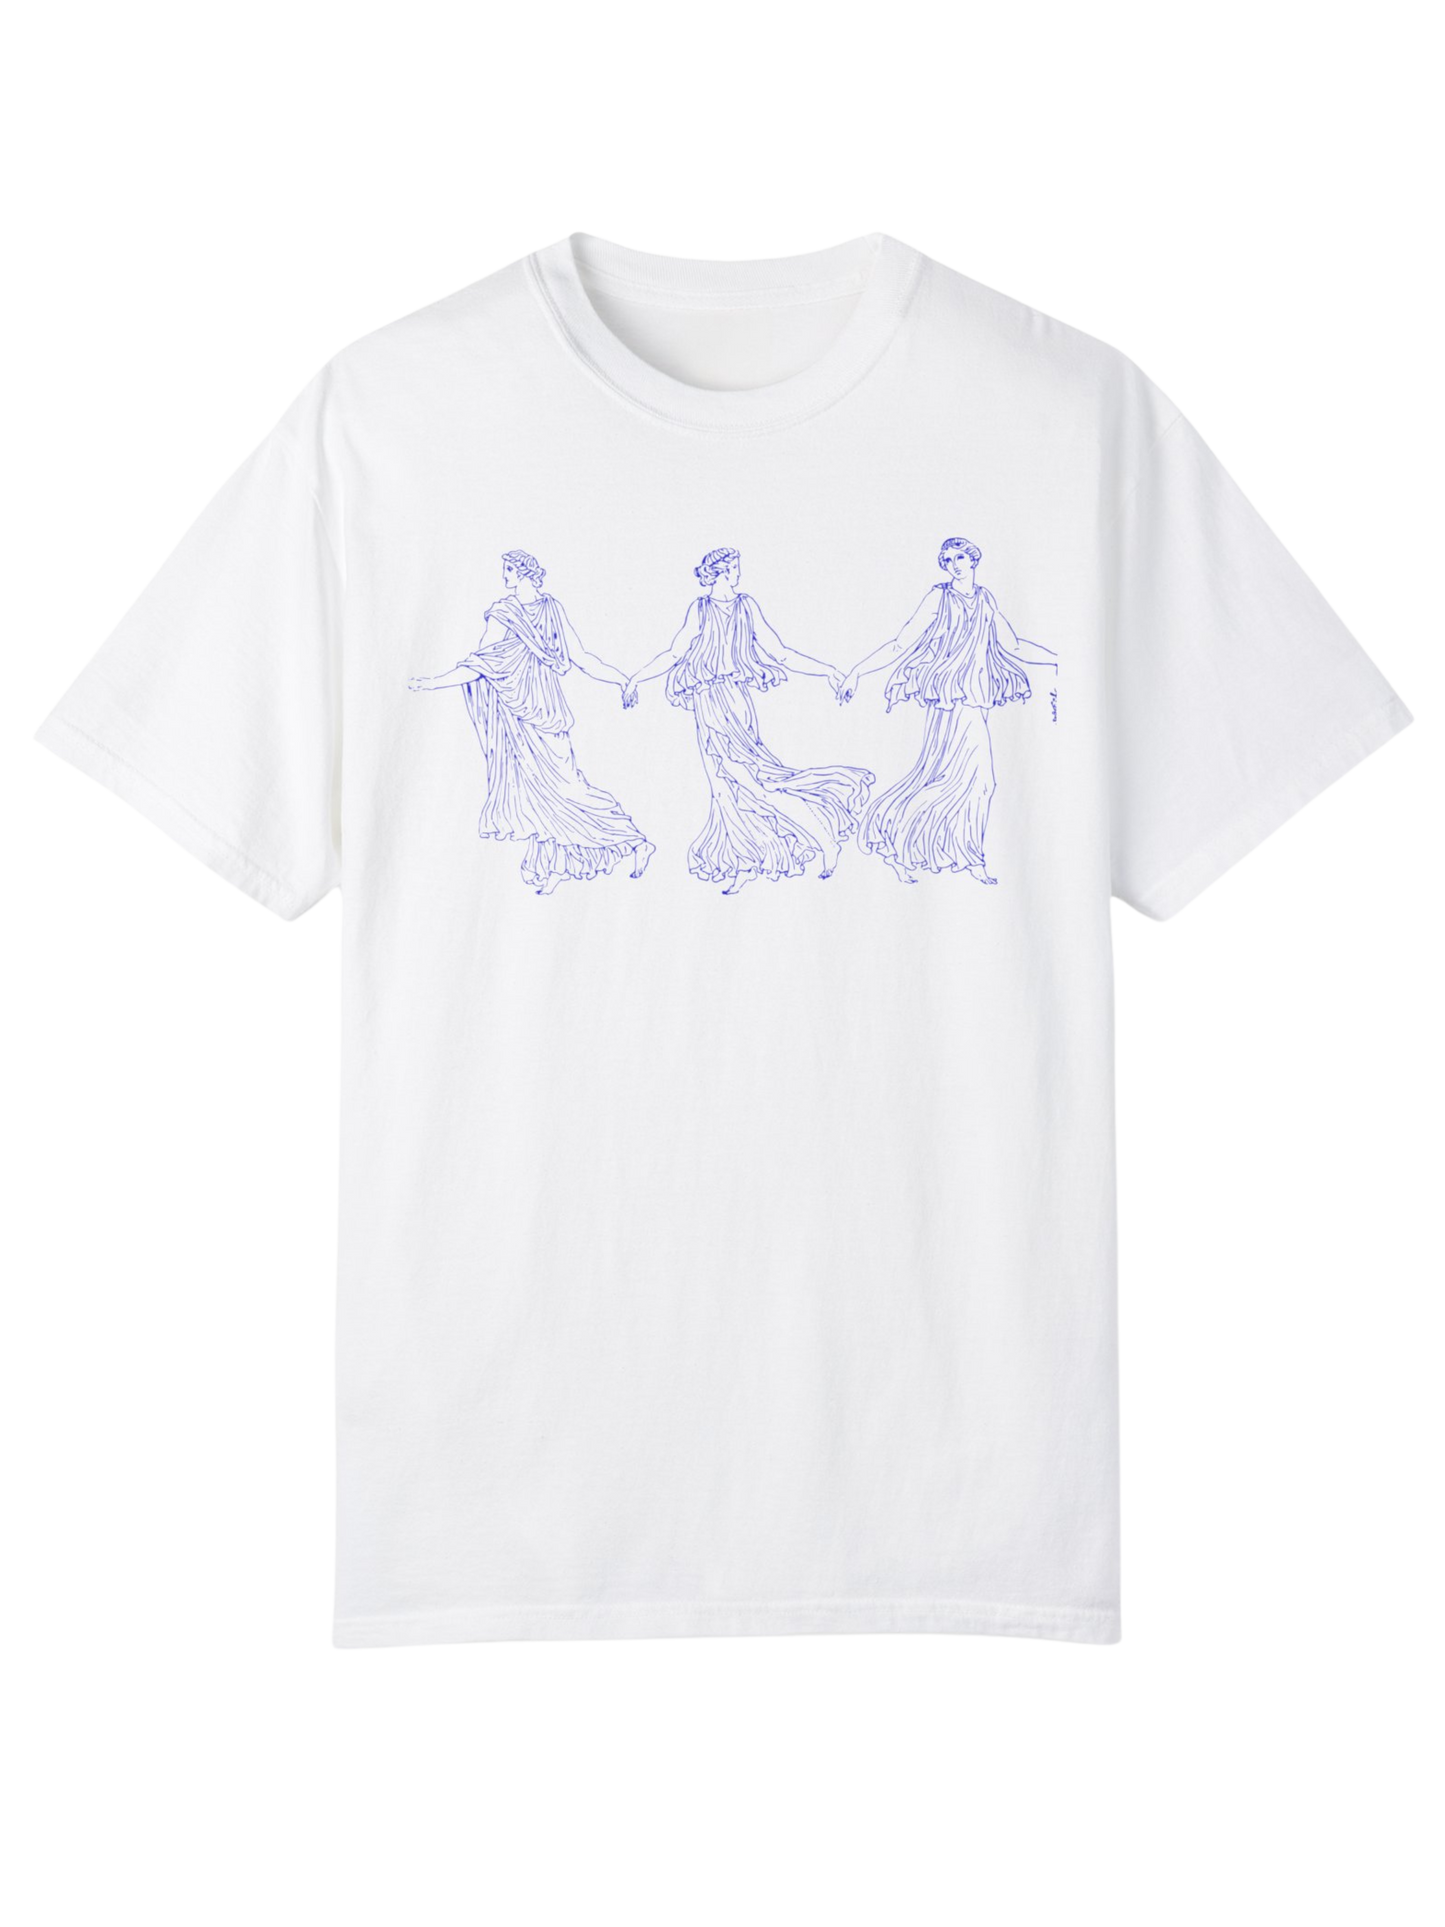 Coven Girlies Unisex Garment-Dyed Tee